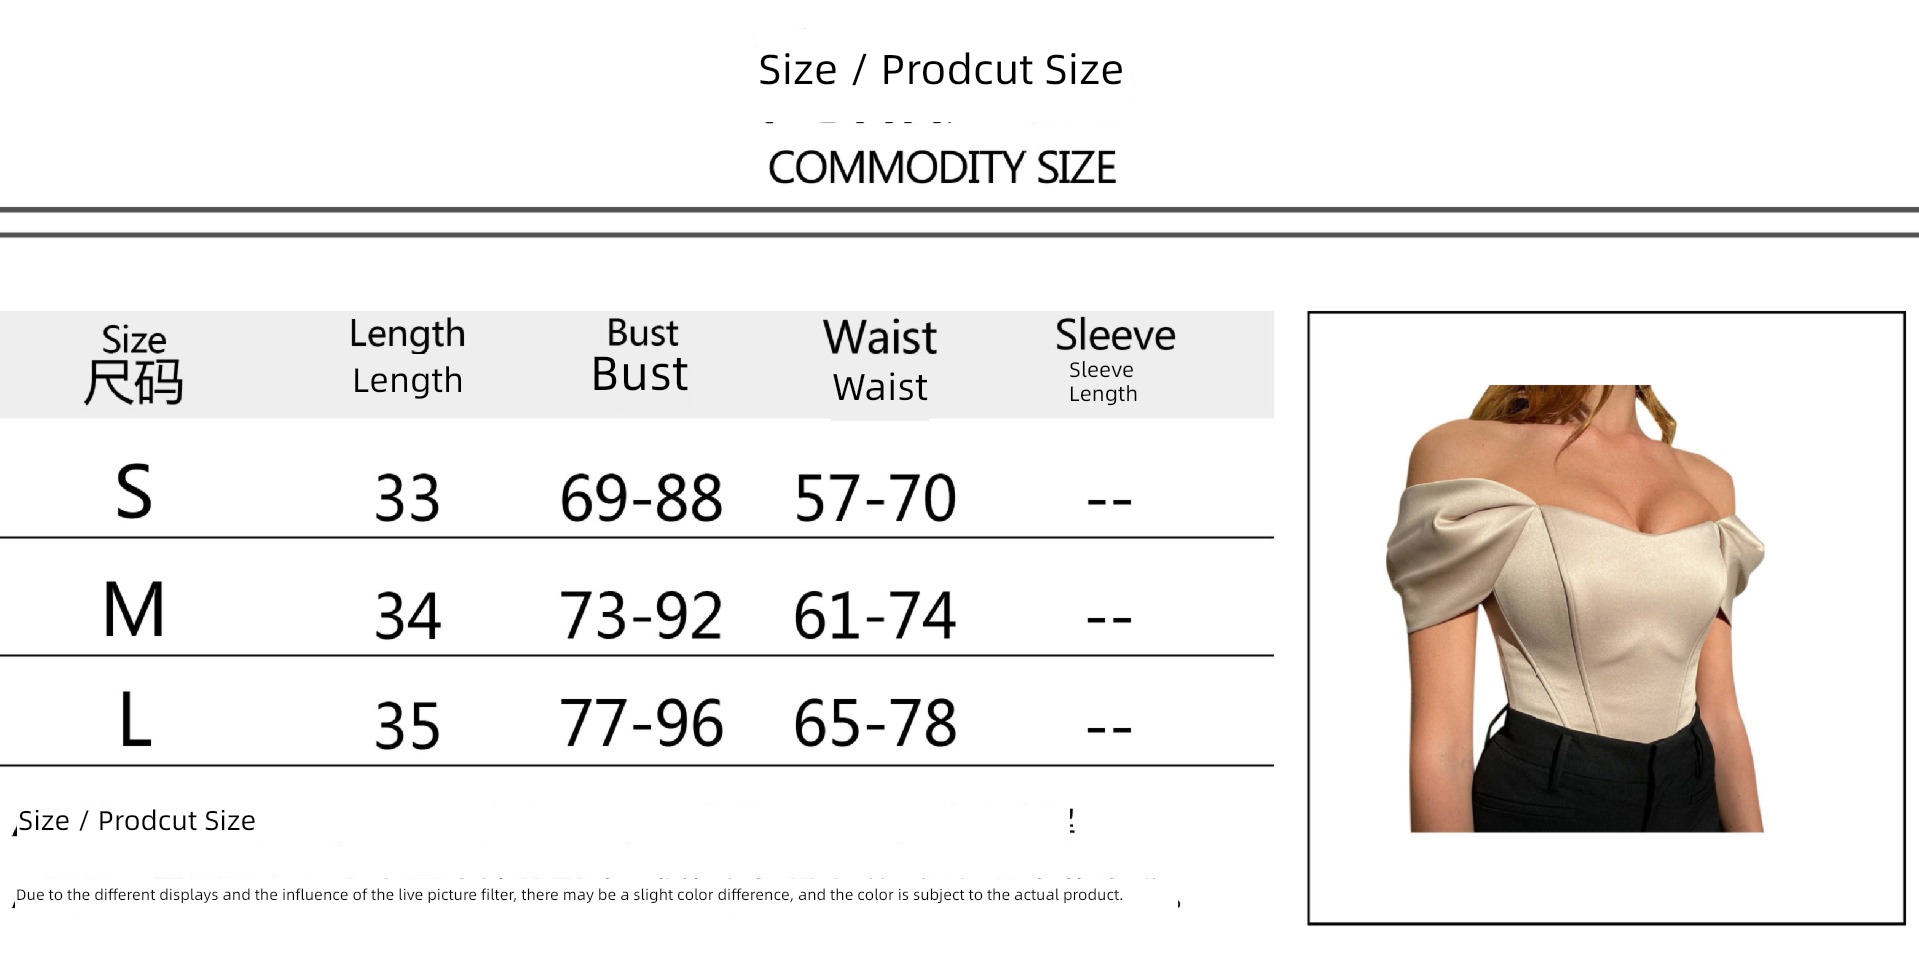 Women   Off   Shoulder   Strapless   Camis   Tanks   Tube   Tops   T shirts